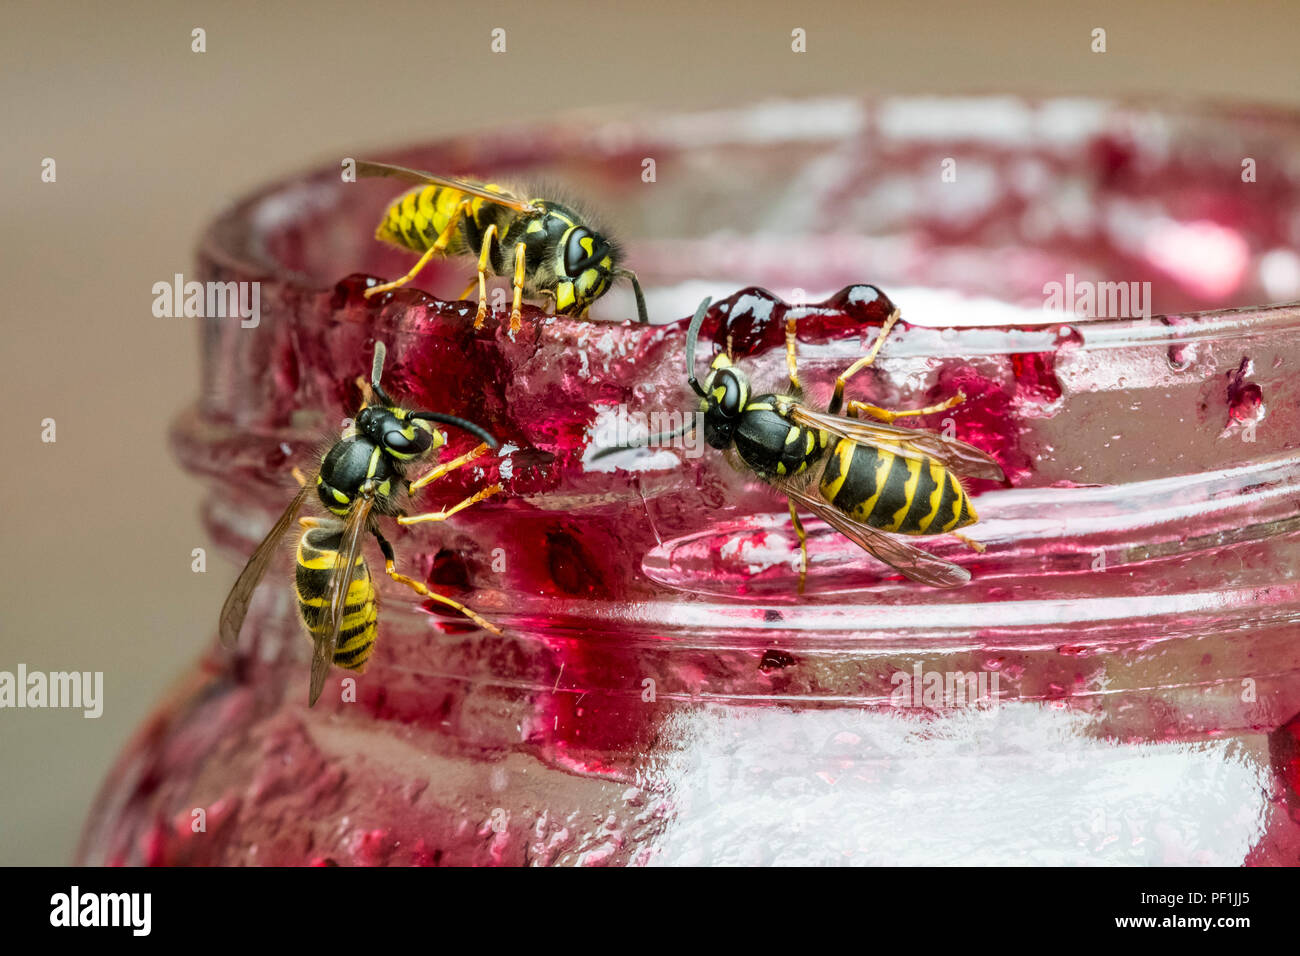 Three common wasps (Vespula vulgaris), attracted by sweet scent of fruit, eating marmalade from open jar / pot of jam in summer Stock Photo